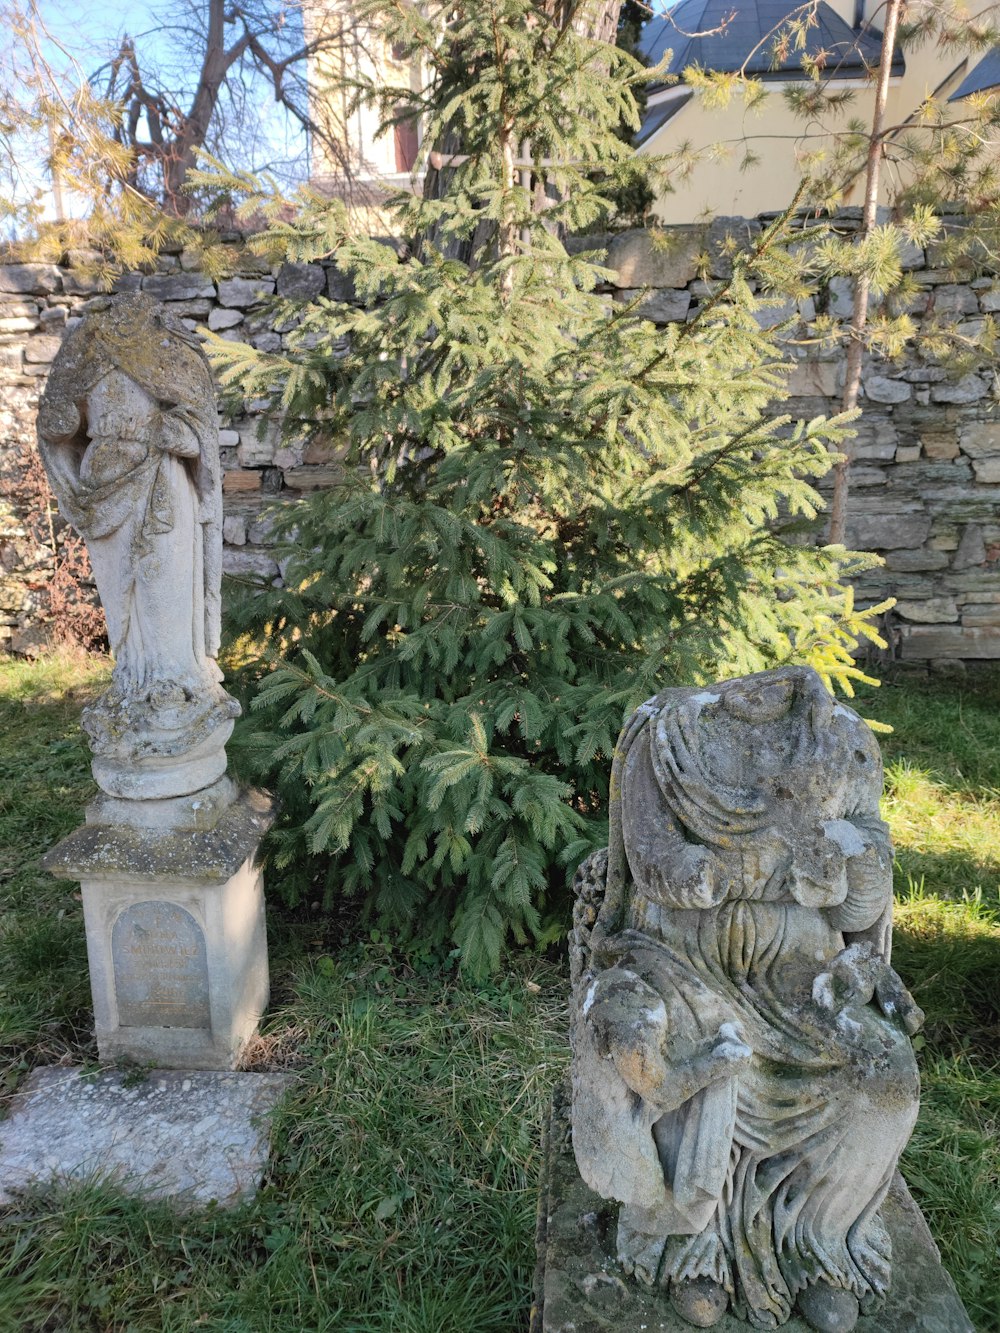 a stone statue sitting next to a tree